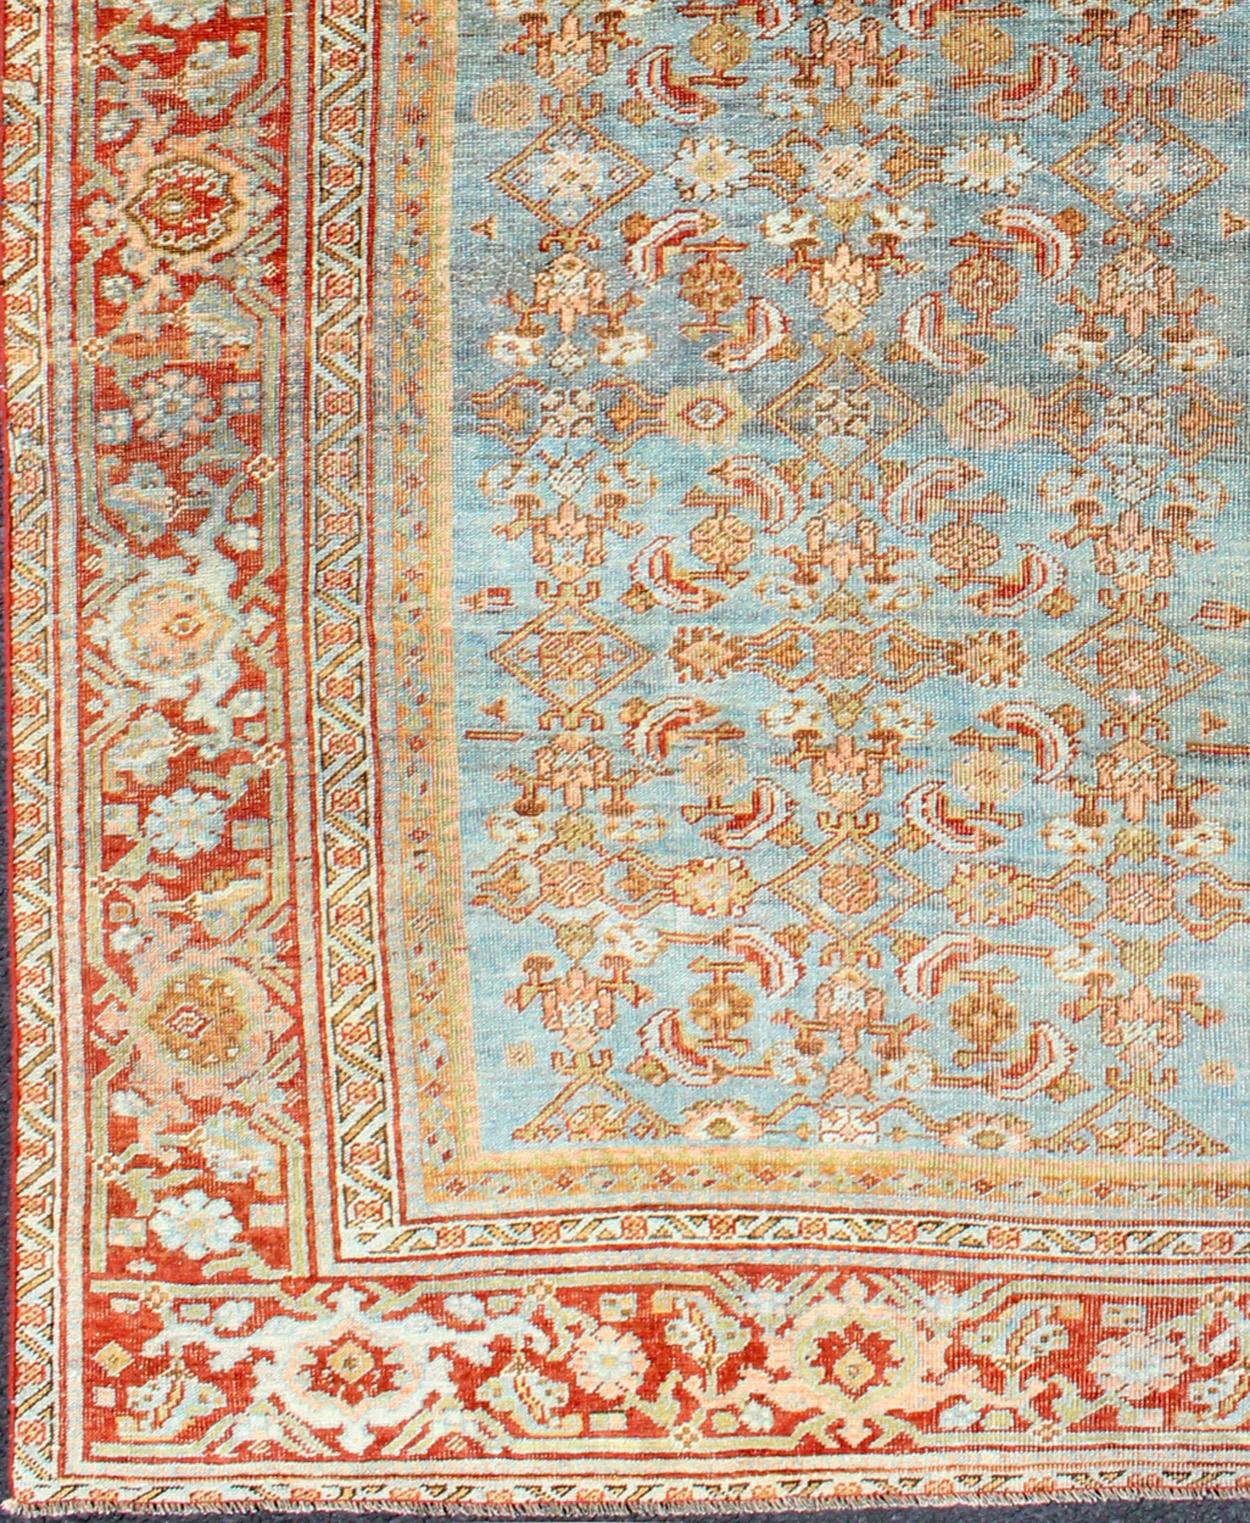 Ornate flower design Bidjar antique Persian rug in a variety of colors, rug ema-7556, country of origin / type: Iran / Bidjar, circa 1900

This magnificent Bidjar with an exquisite, all-over pattern, rests beautifully on a light blue-colored